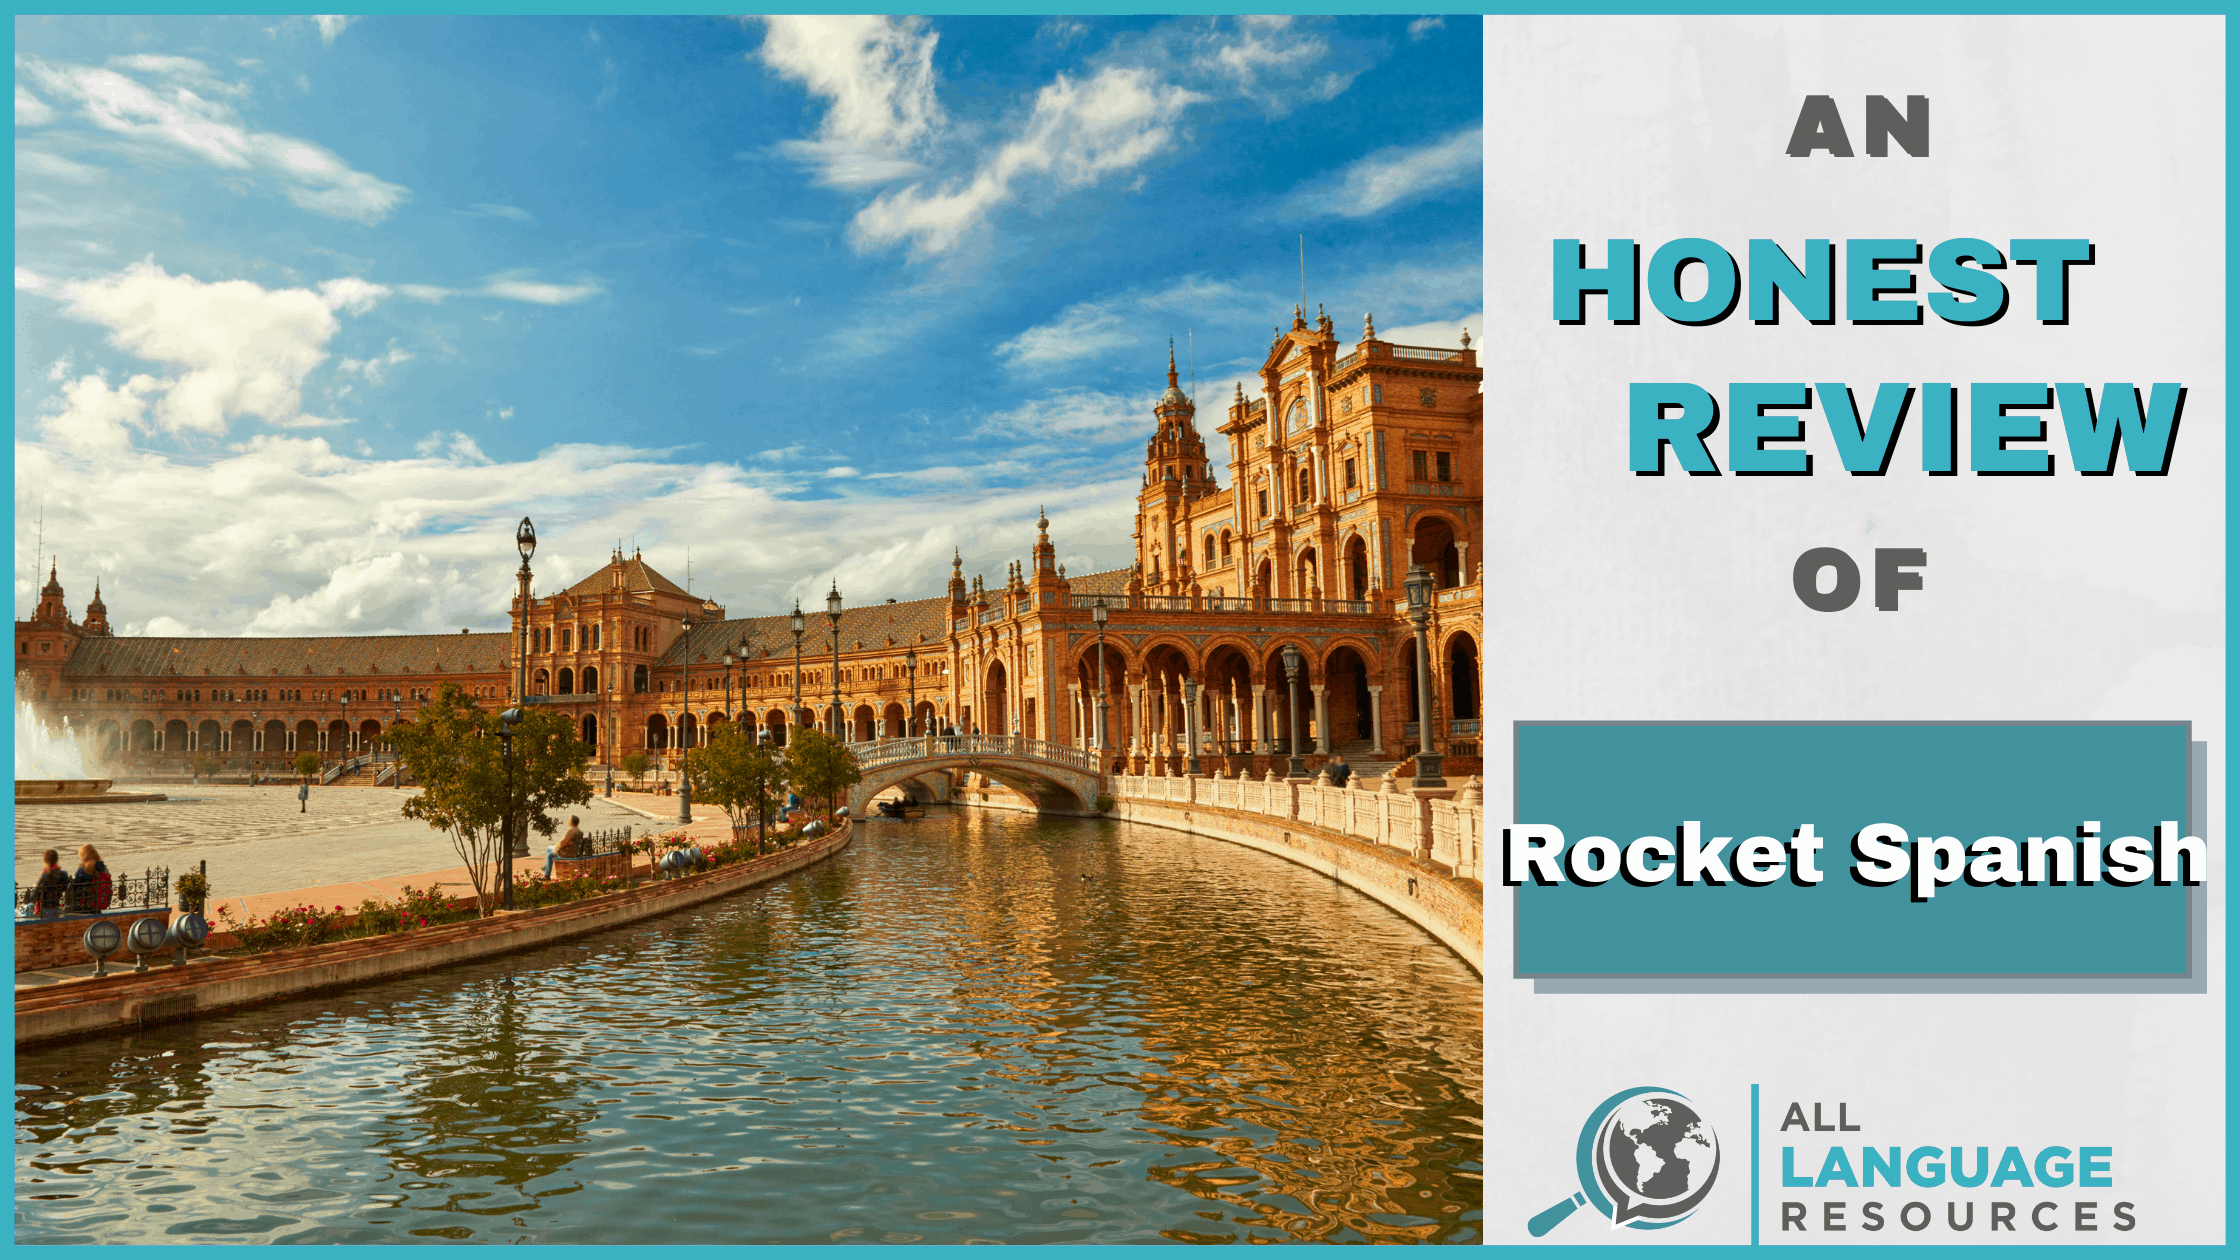 An Honest Review of Rocket Spanish With Image of Spanish Architecture